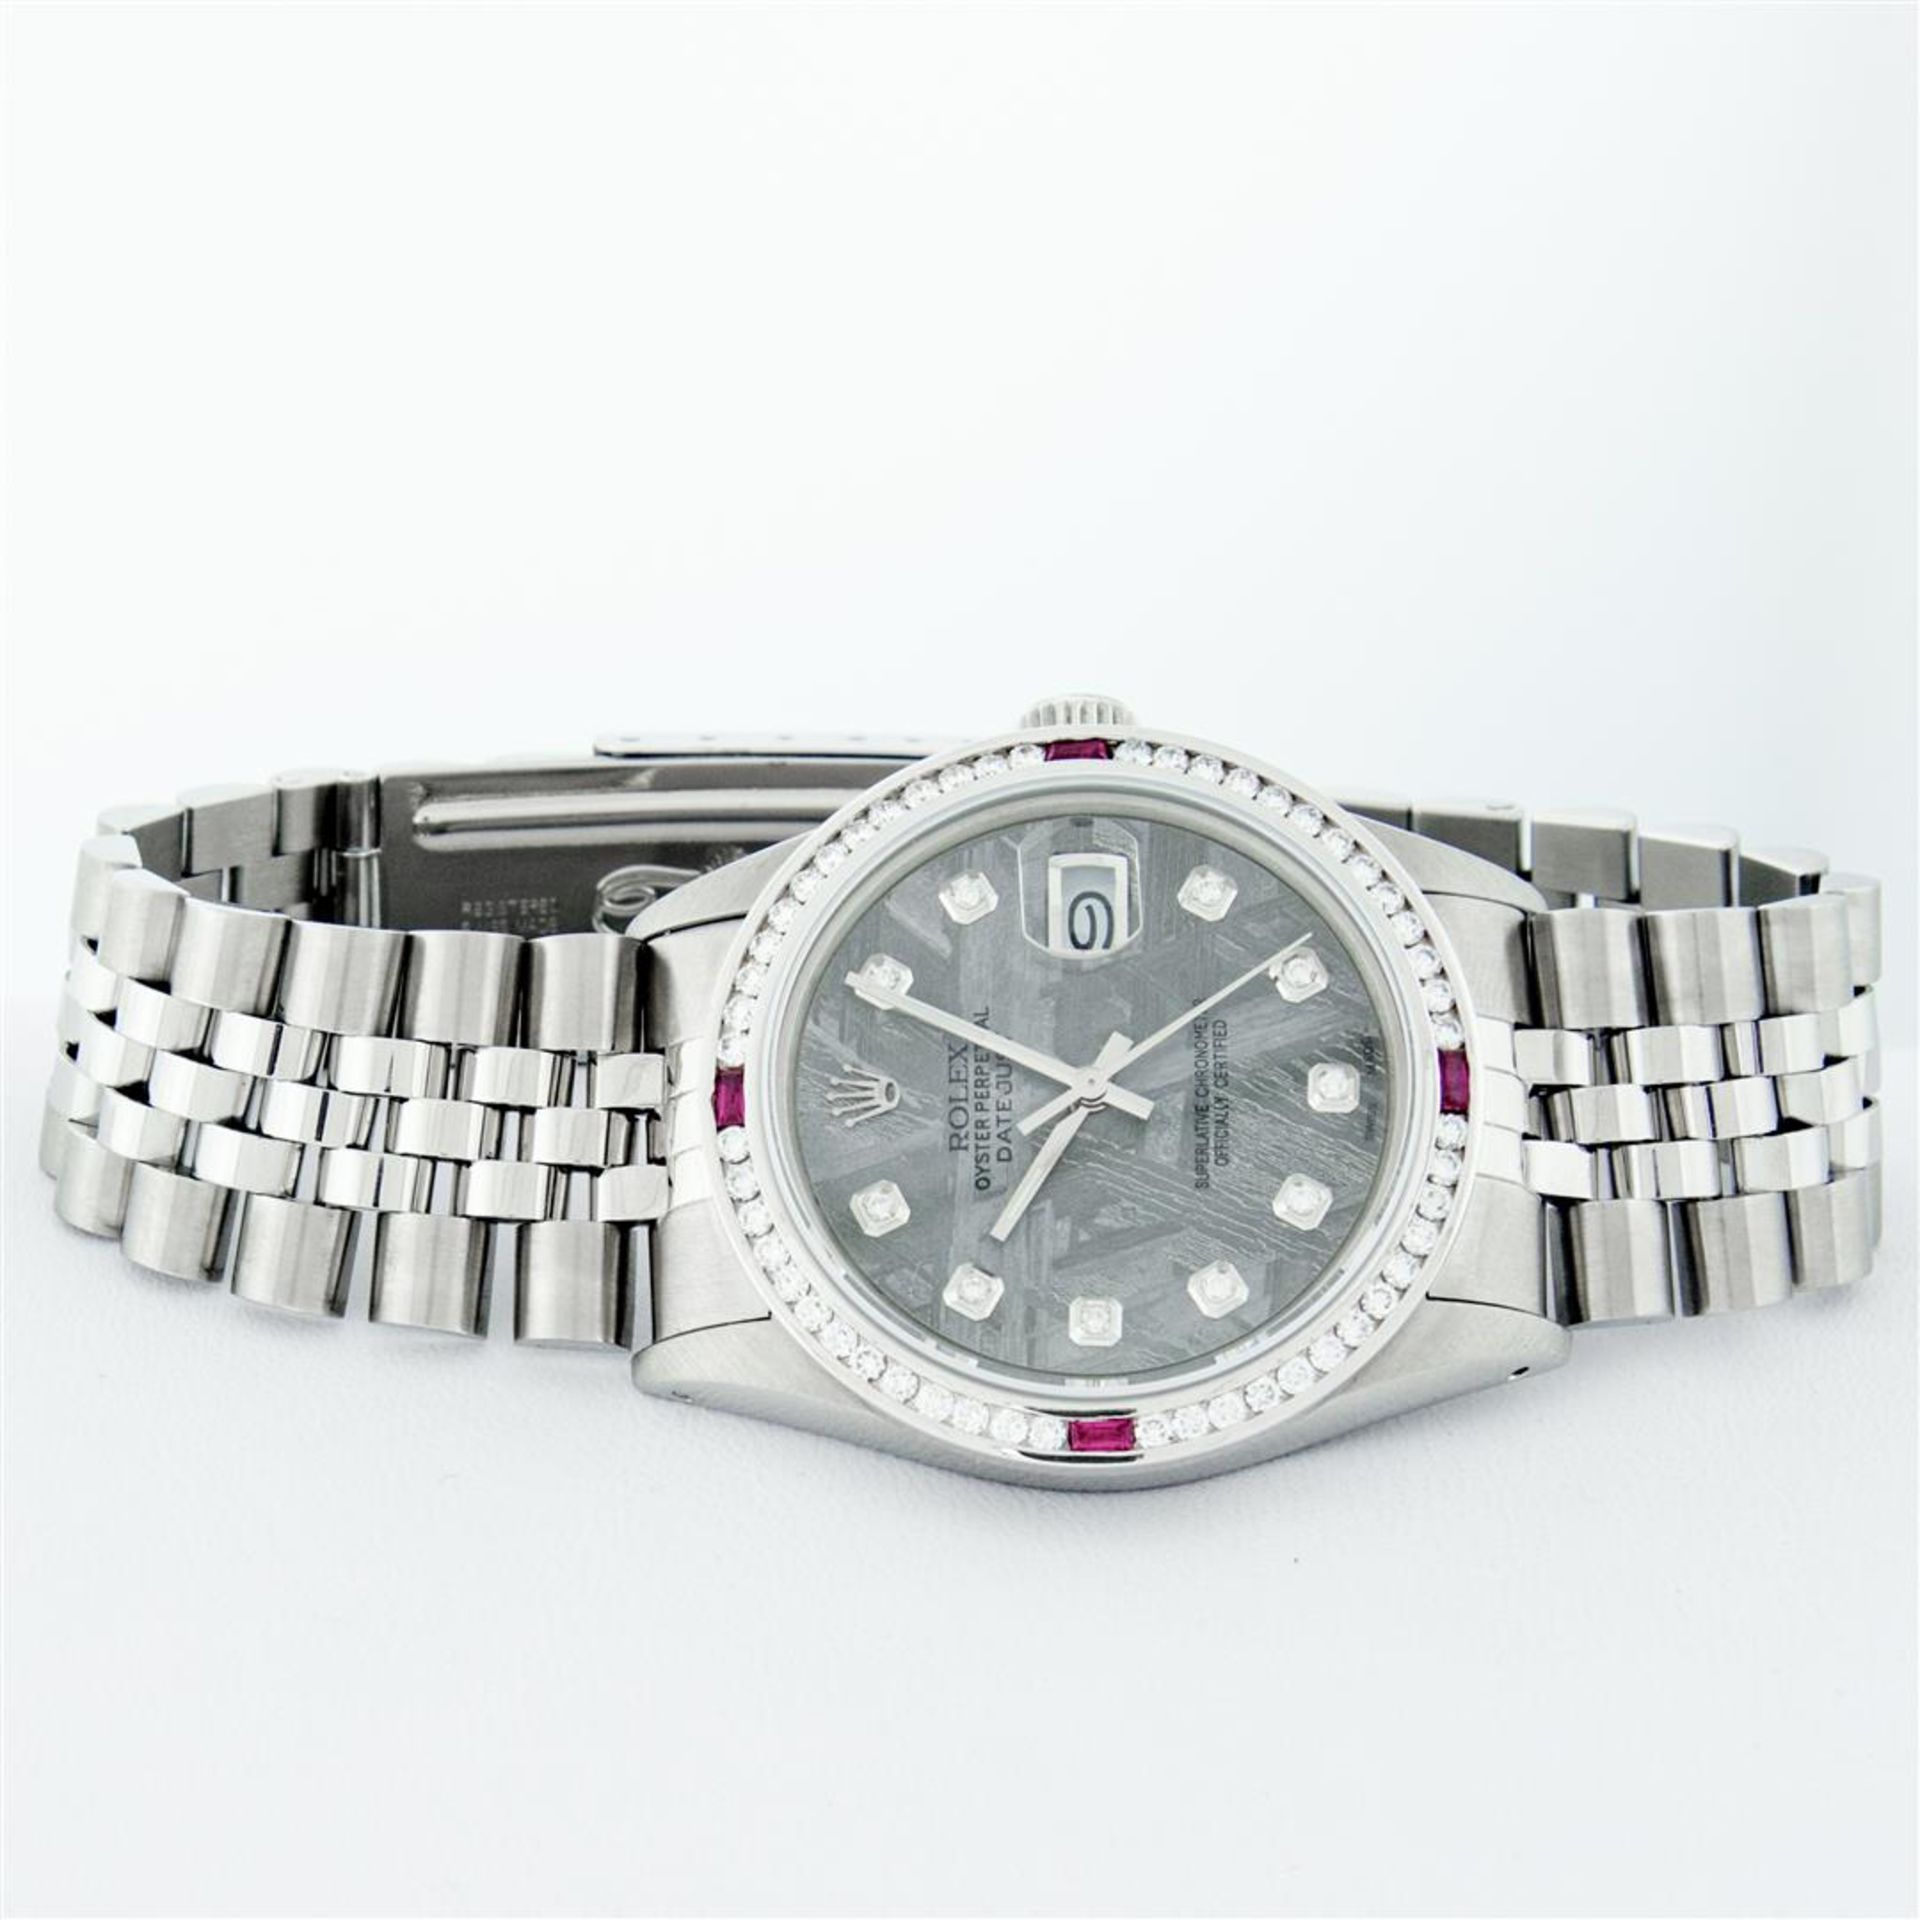 Rolex Mens SS Meteorite Diamond & Ruby Channel Set Oyster Perpetual Datejust Wri - Image 5 of 9